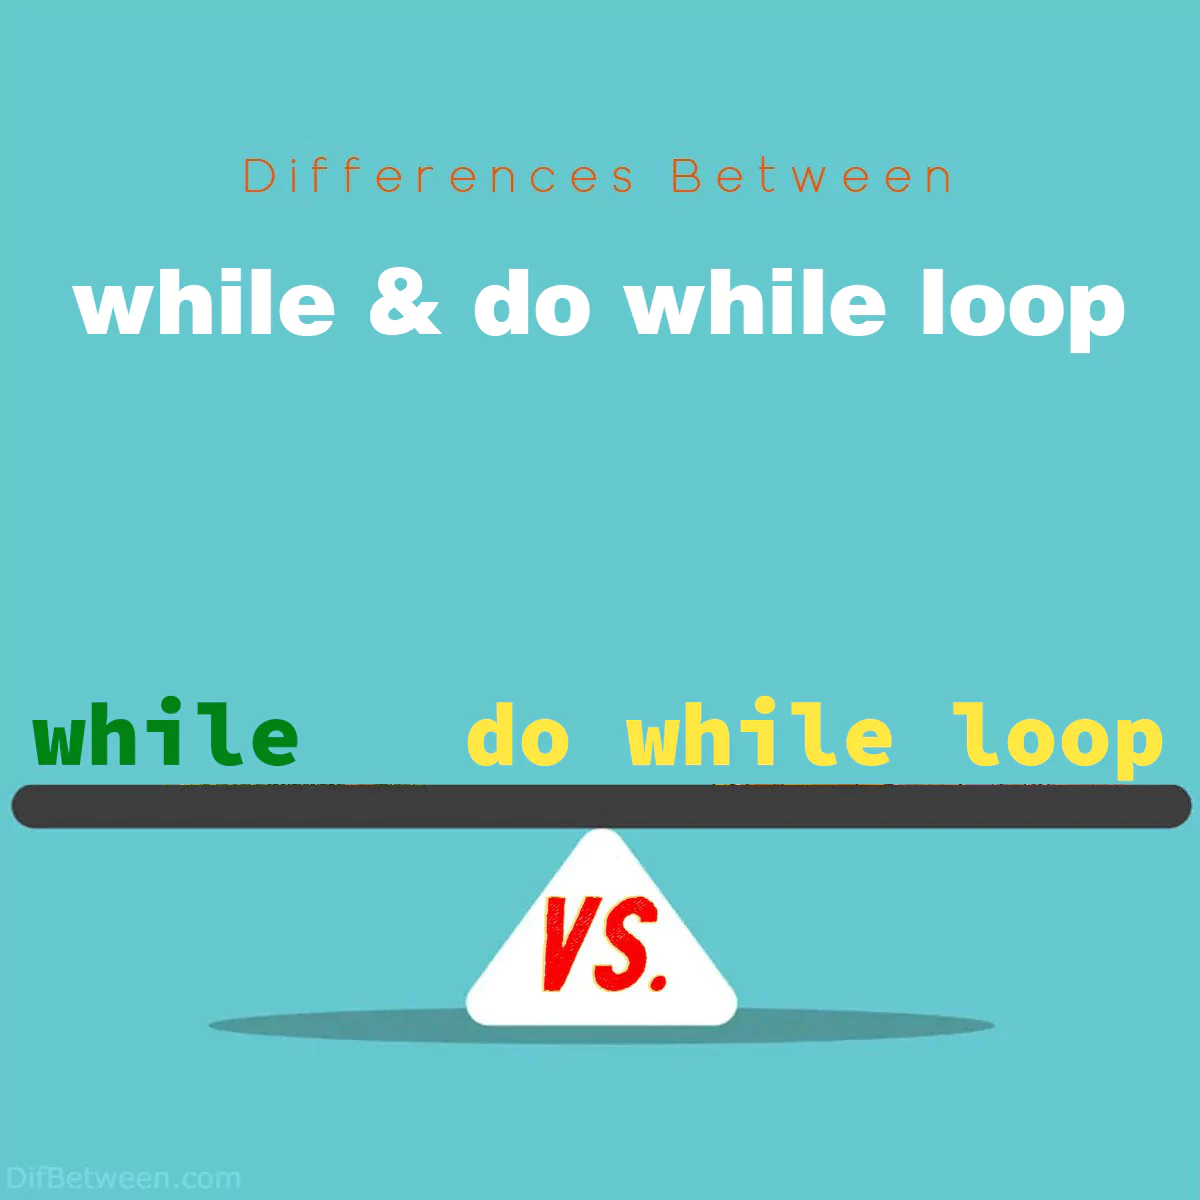 Differences Between while and do while loop